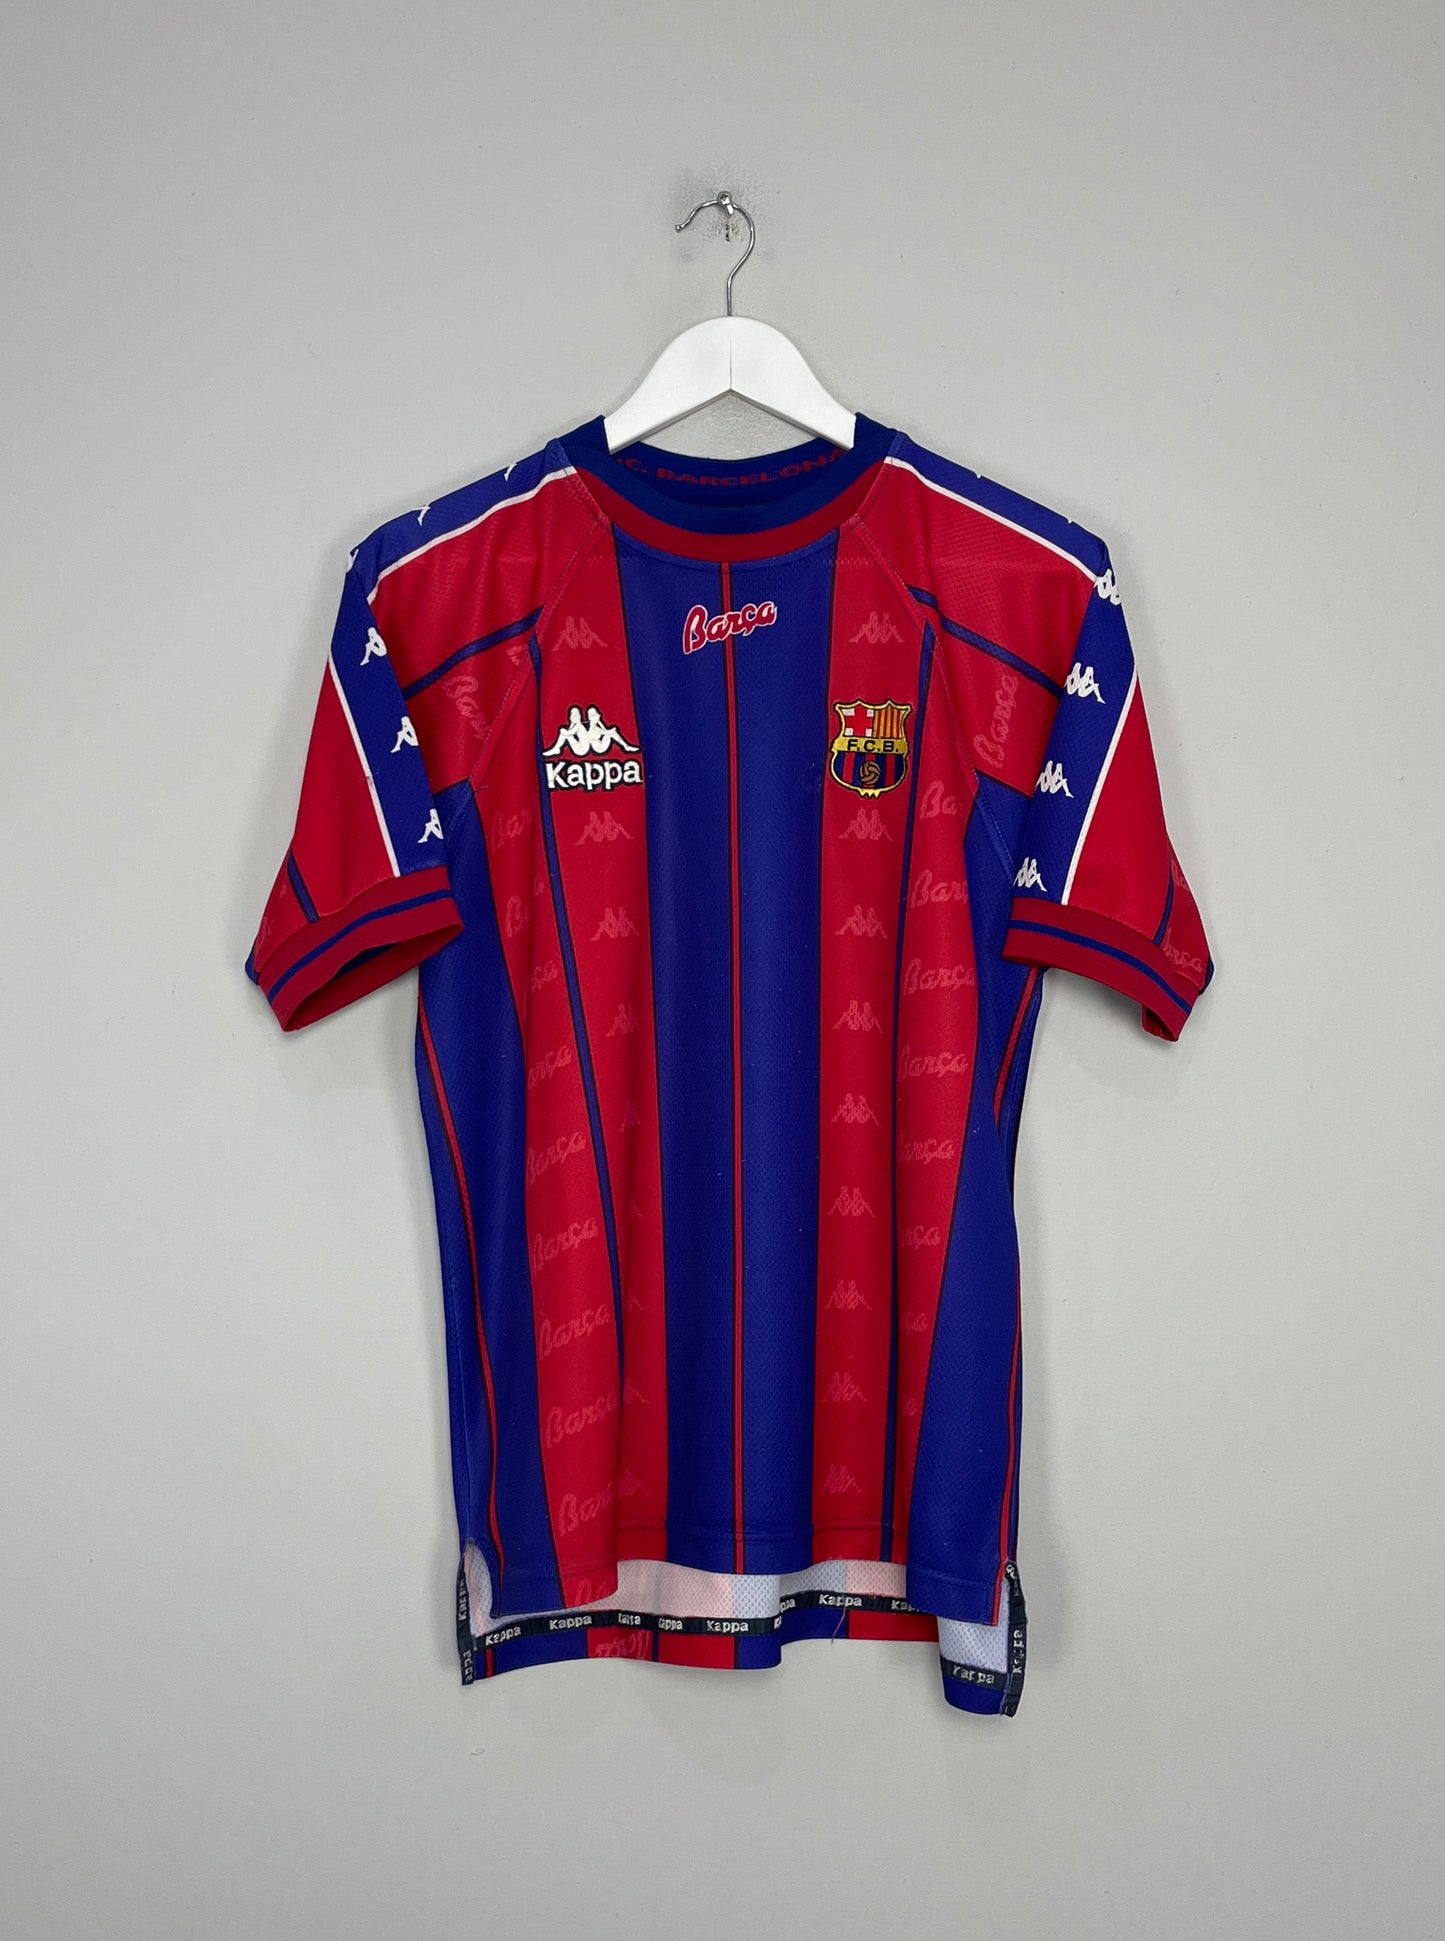 Image of the Barcelona shirt from the 1997/98 season